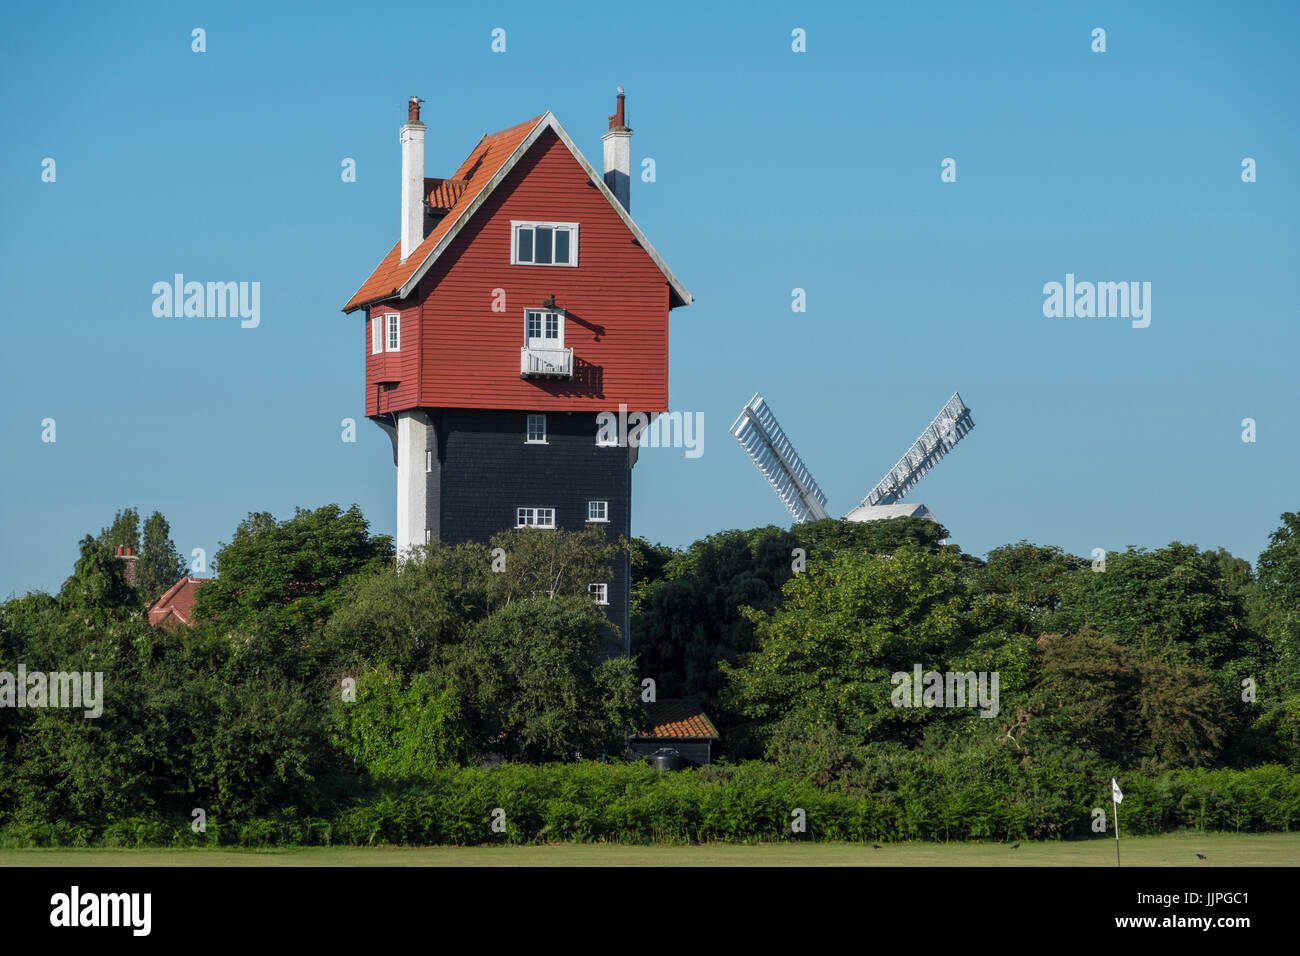 The House in the Clouds is a disguised water tower. Stock Photo